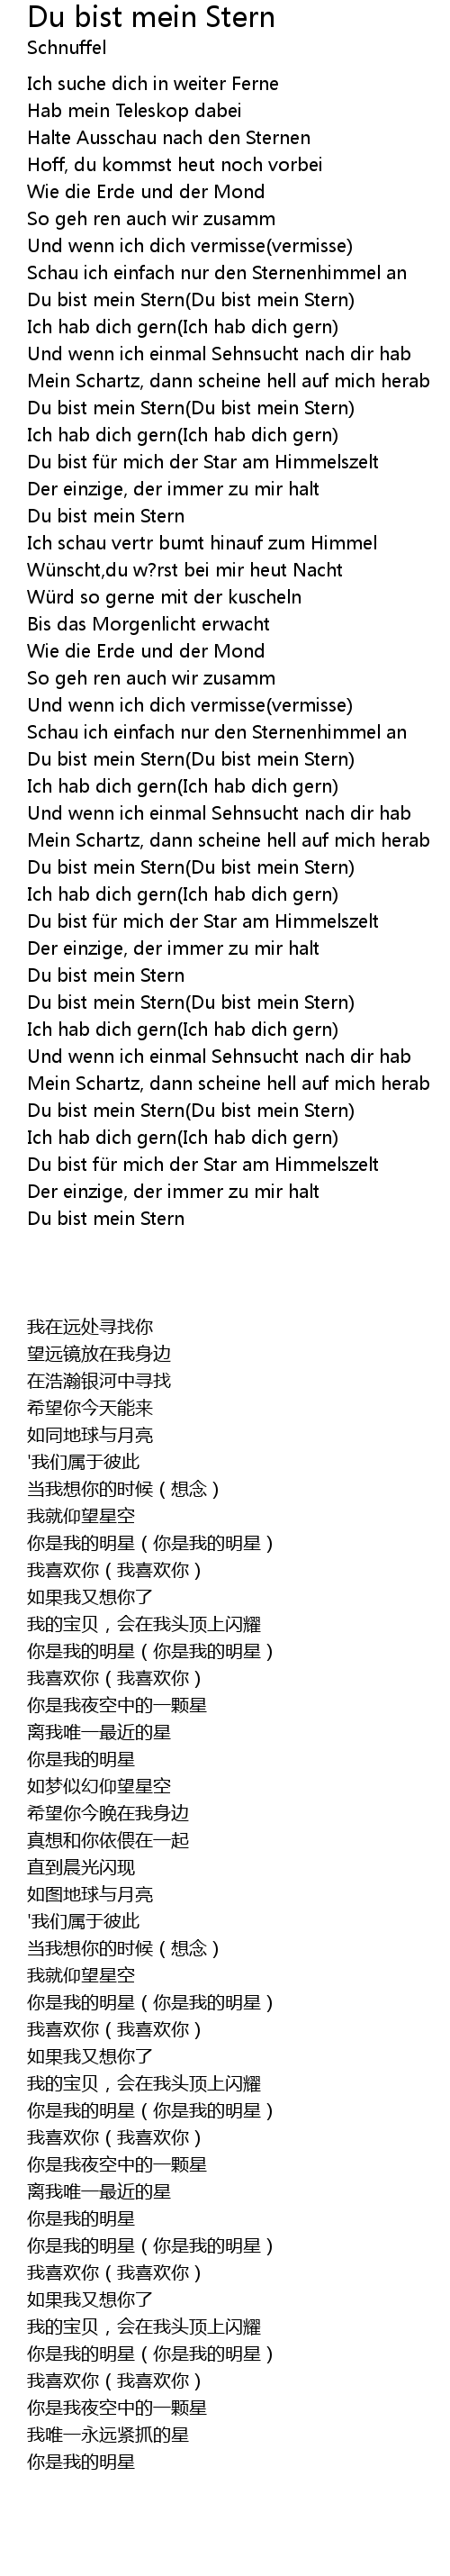 Mein songtext bist du ching Songtext Ching